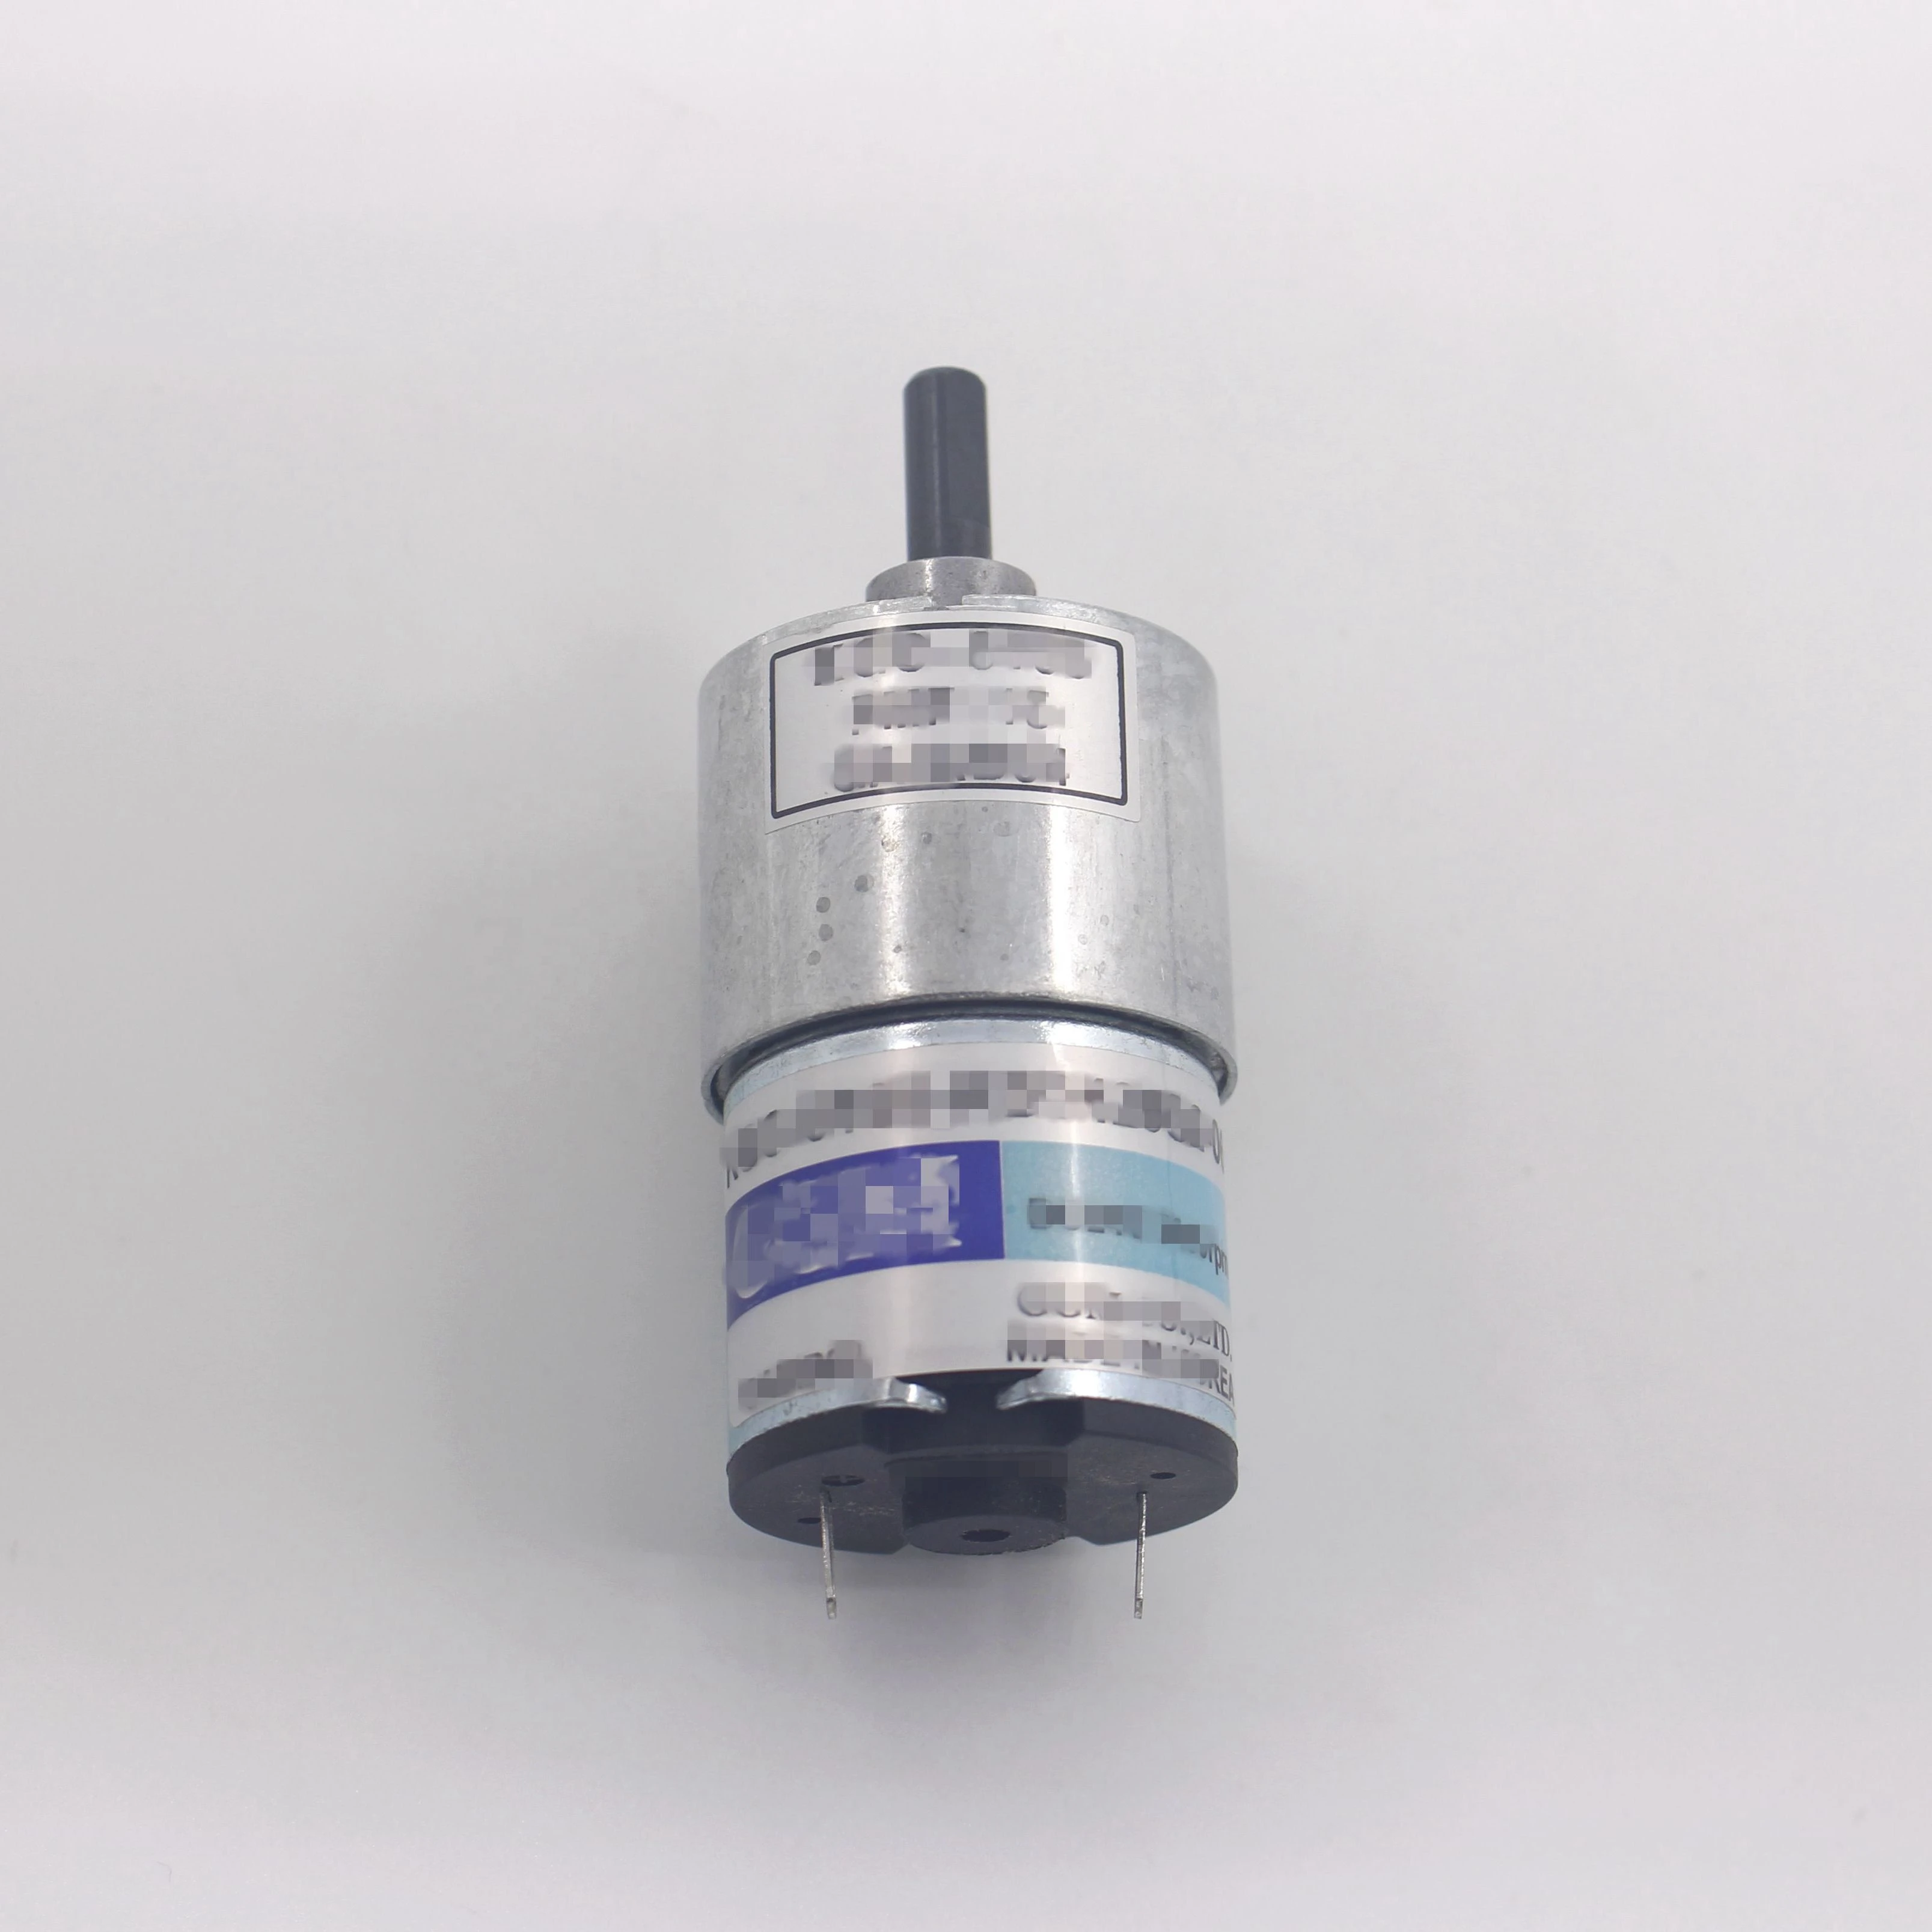 MOTOR-0010 Spare parts Suitable for Lectra Q25 Auto cutter machine